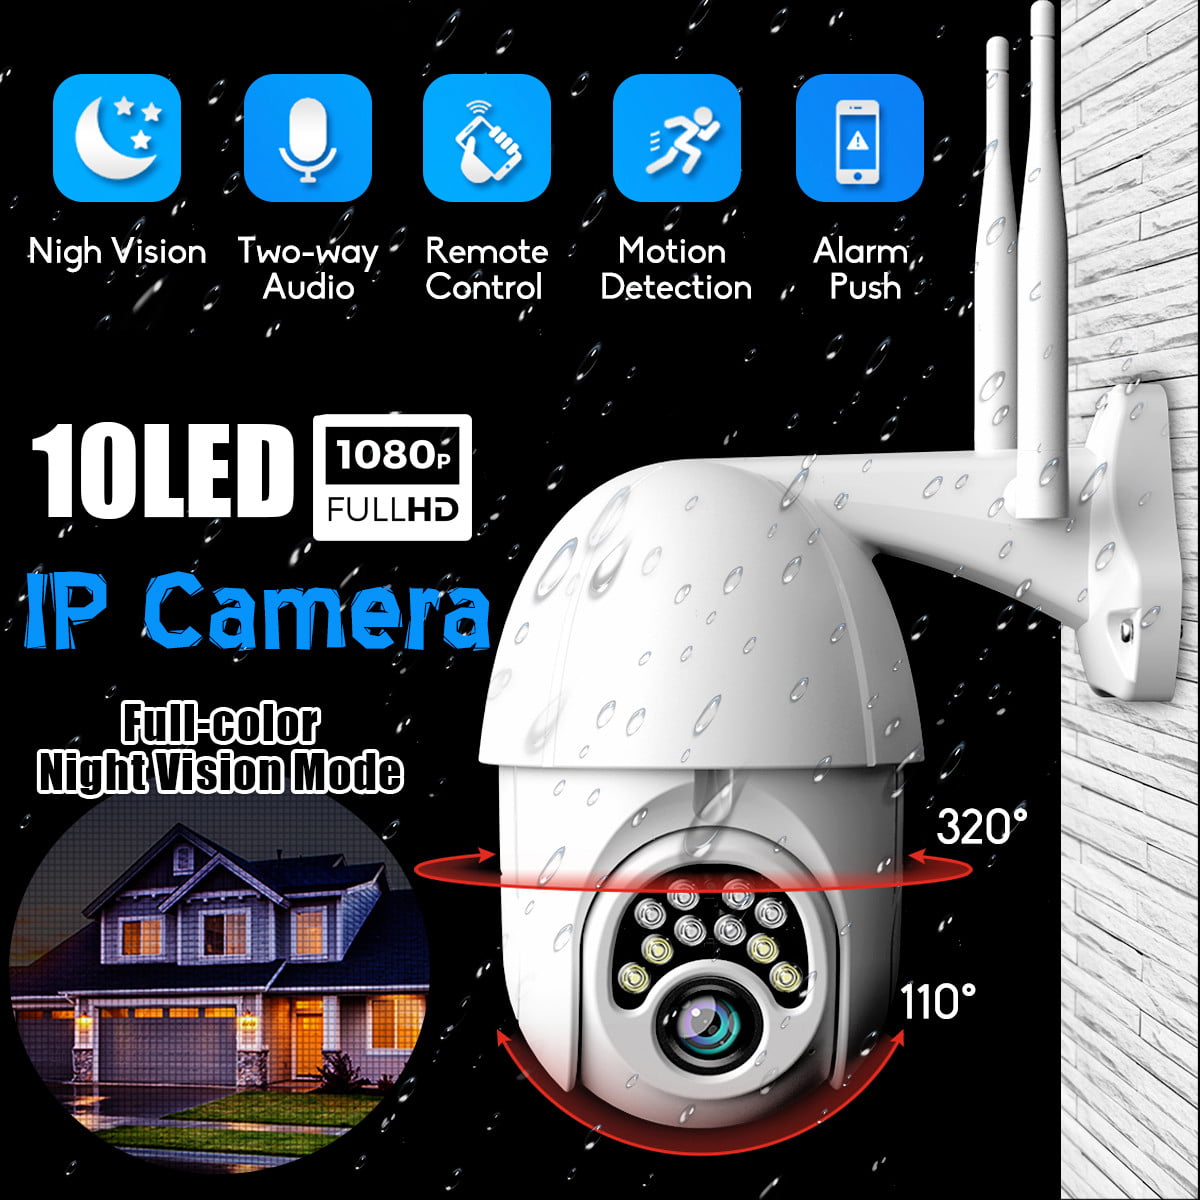 Outdoor PTZ 2.4G WiFi Security Camera Wireless Bullet Surveillance Camera HD 1080P Pan/Tilt 5X Optical Zoom 165ft Night Vision Two-Way Audio IP66 Weatherproof Motion Detection & E-Mail White 